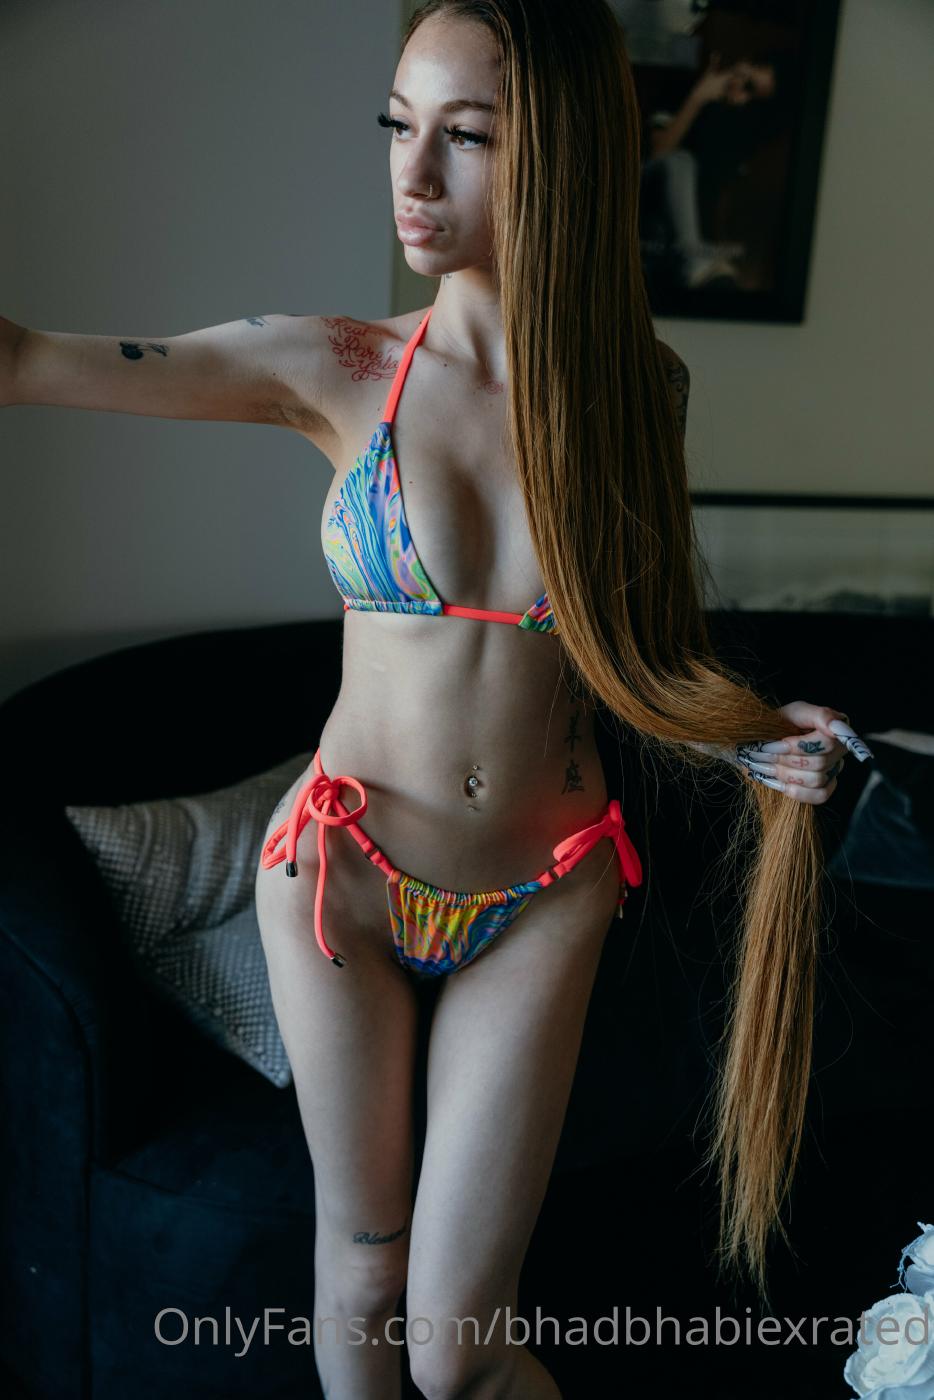 Bhad Bhabie X Rated Sexy Bikini Onlyfans Set Leaked 0014